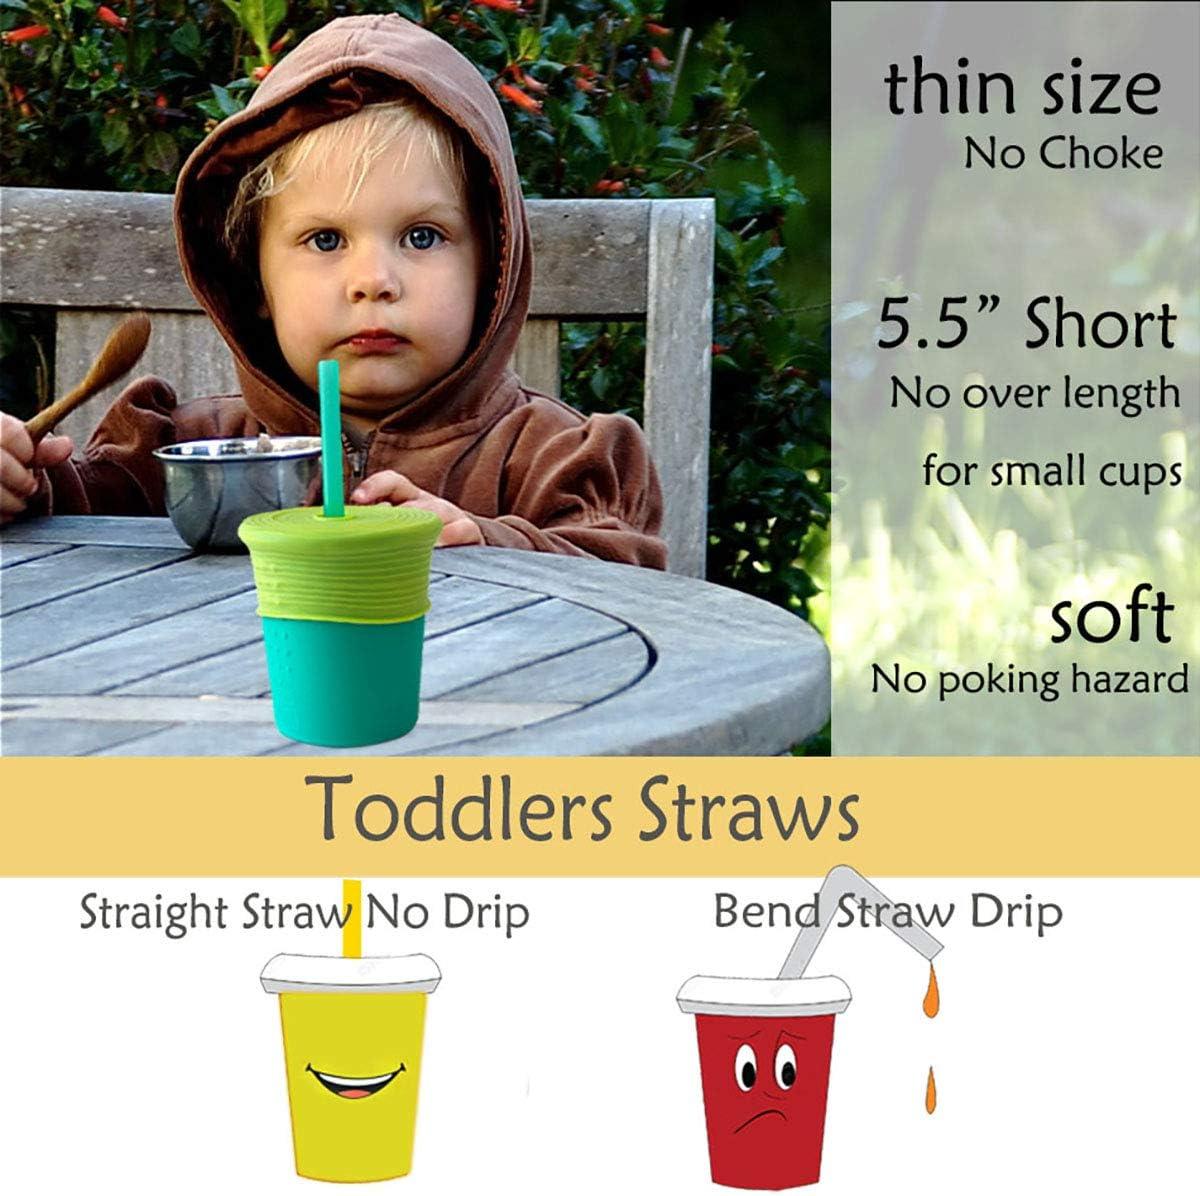  Reusable Silicone Straws for Toddlers & Kids - 6 pcs Flexible  Short Drink 6.7 Straws for 6-12 oz Yeti/Rtic/Ozark Tumblers & 2 Cleaning  Brushes - BPA Free, Eco-Friendly,no Rubber Tast 